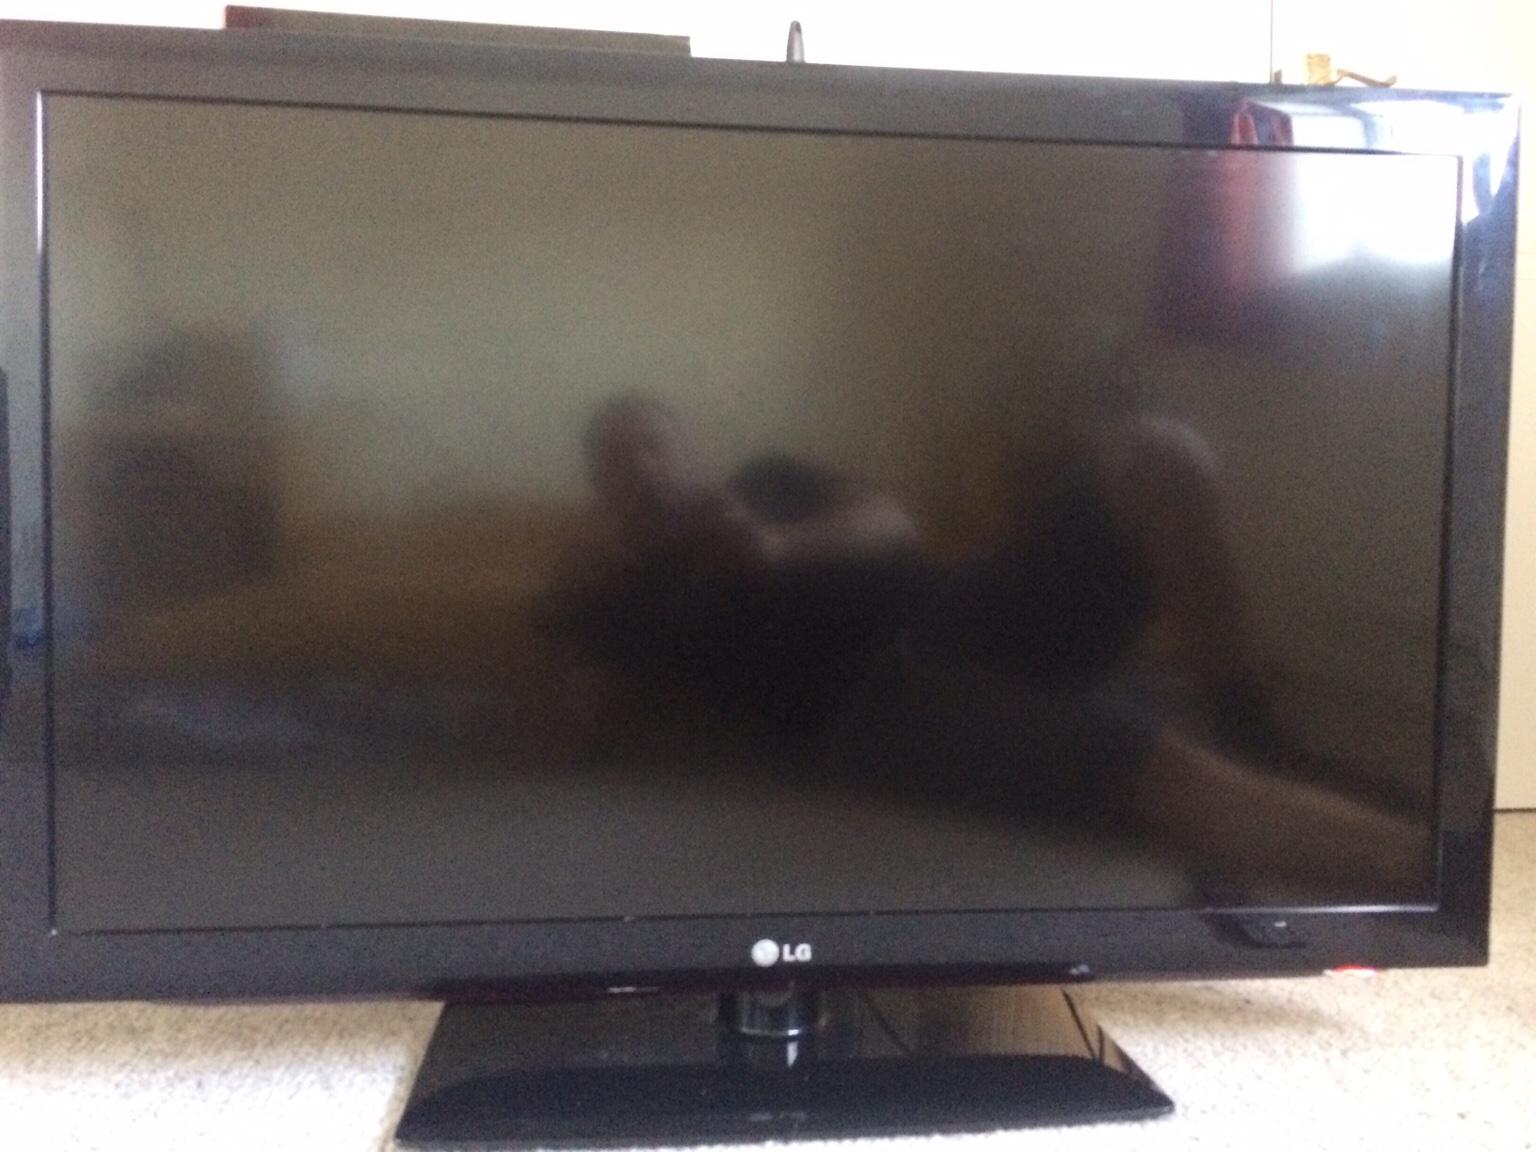 Lg 42 Inch Tv In St17 Stafford For 30 00 For Sale Shpock